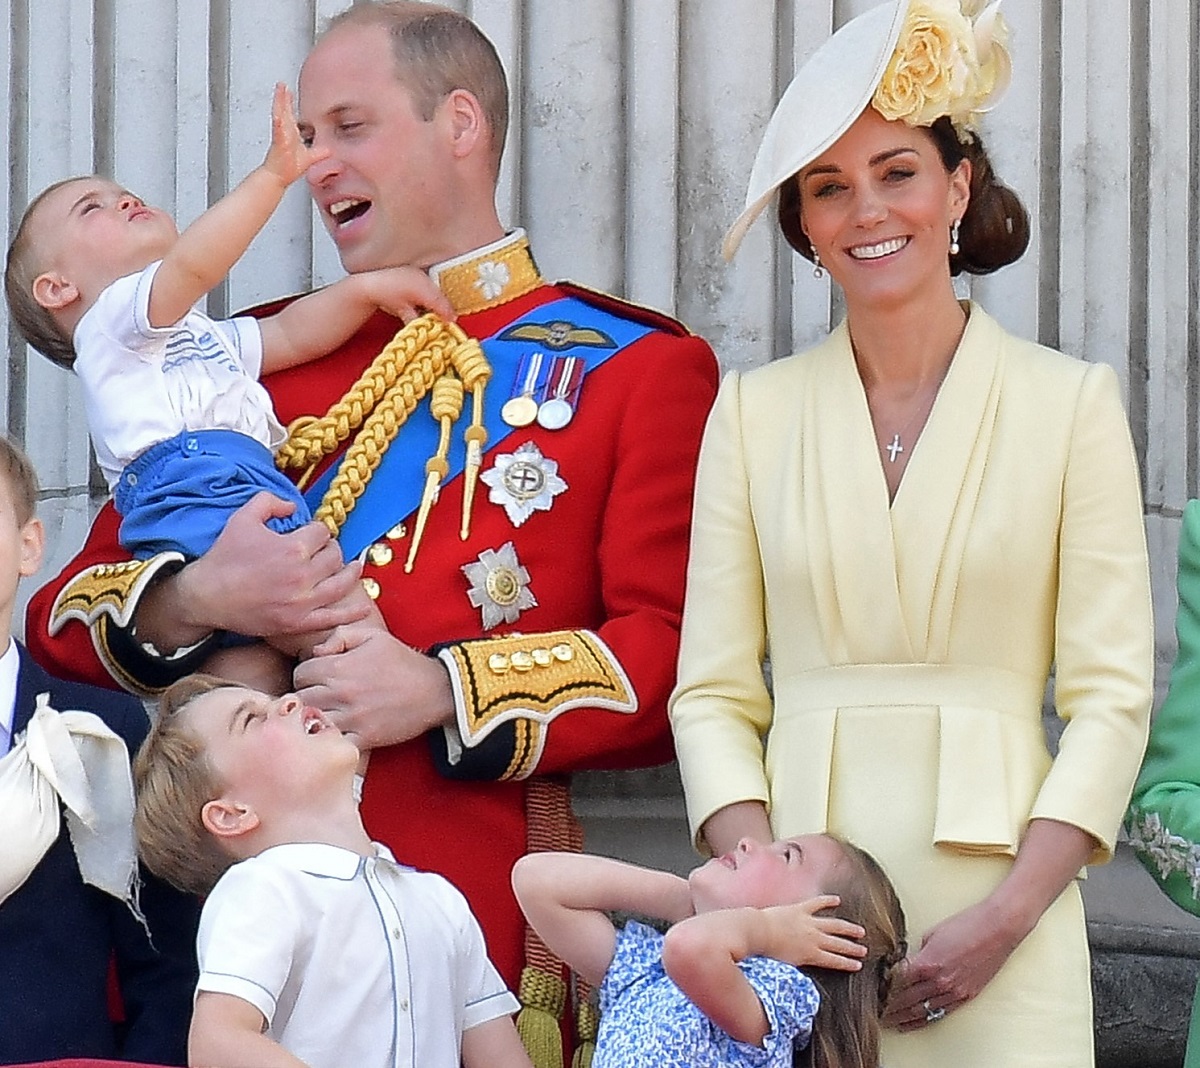 Kate Middleton and Prince William on the Buckingham Palace balcony with their children Prince George, Princess Charlotte, and Prince Louis, who the are hoping behave